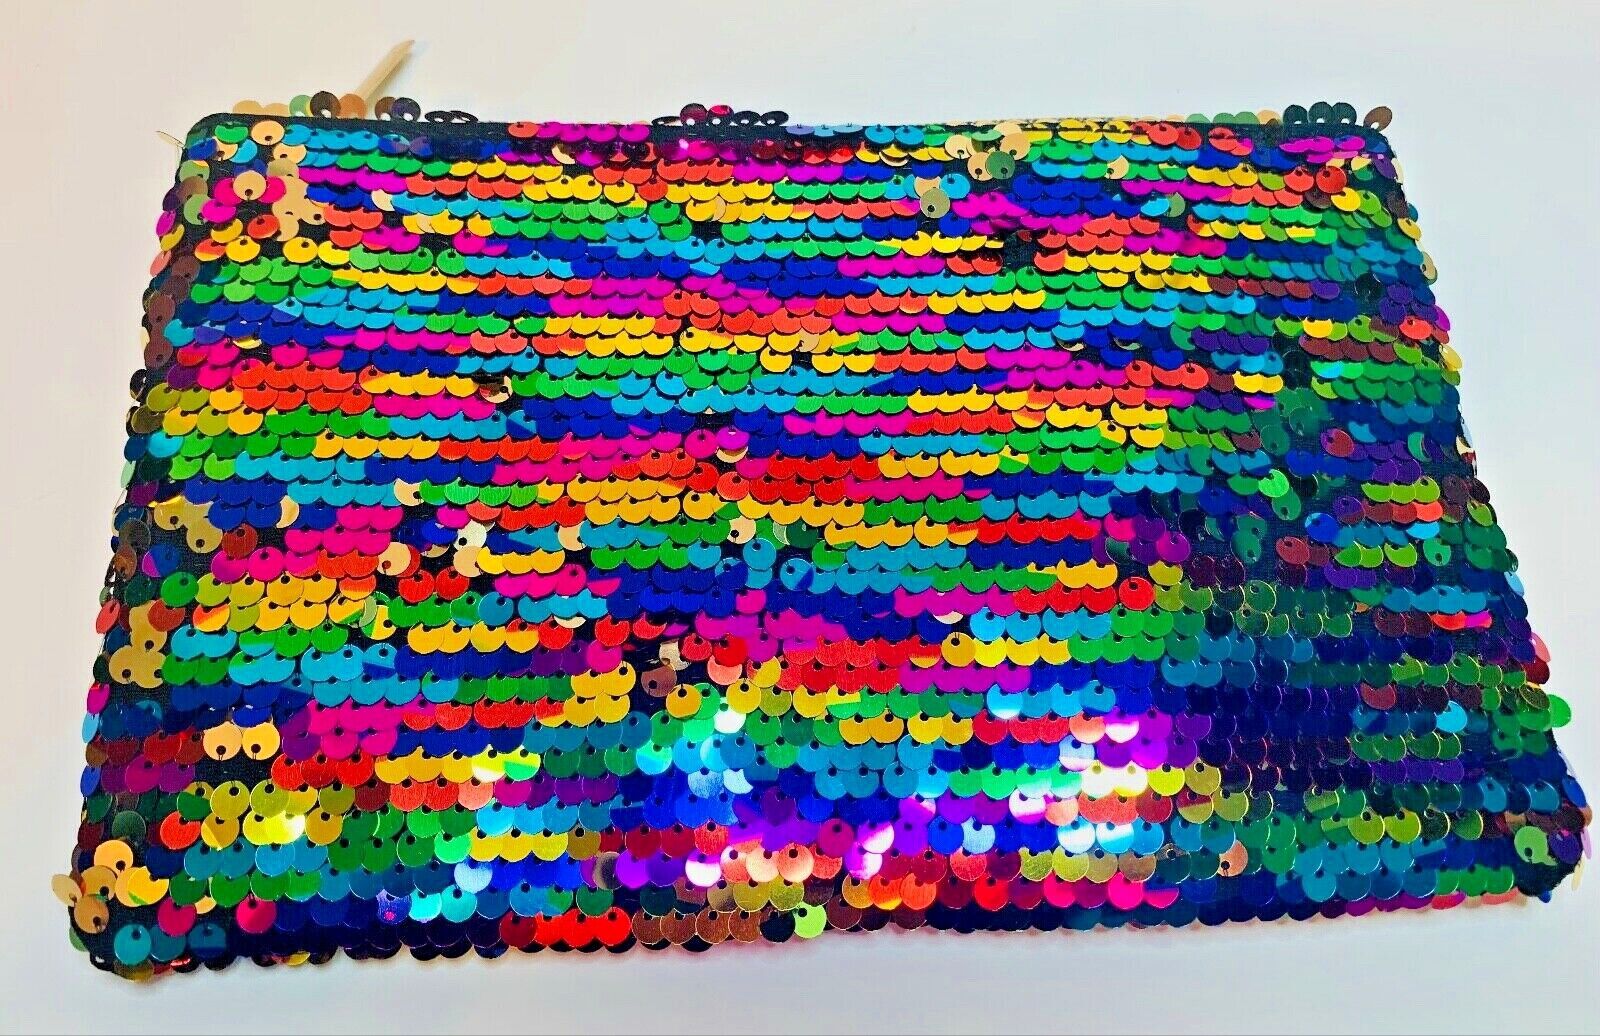 BNWT BOLD RAINBOW TO GOLD TRAVEL CASE BAG MAKEUP COSMETIC POUCH Regular discount 35% OFF